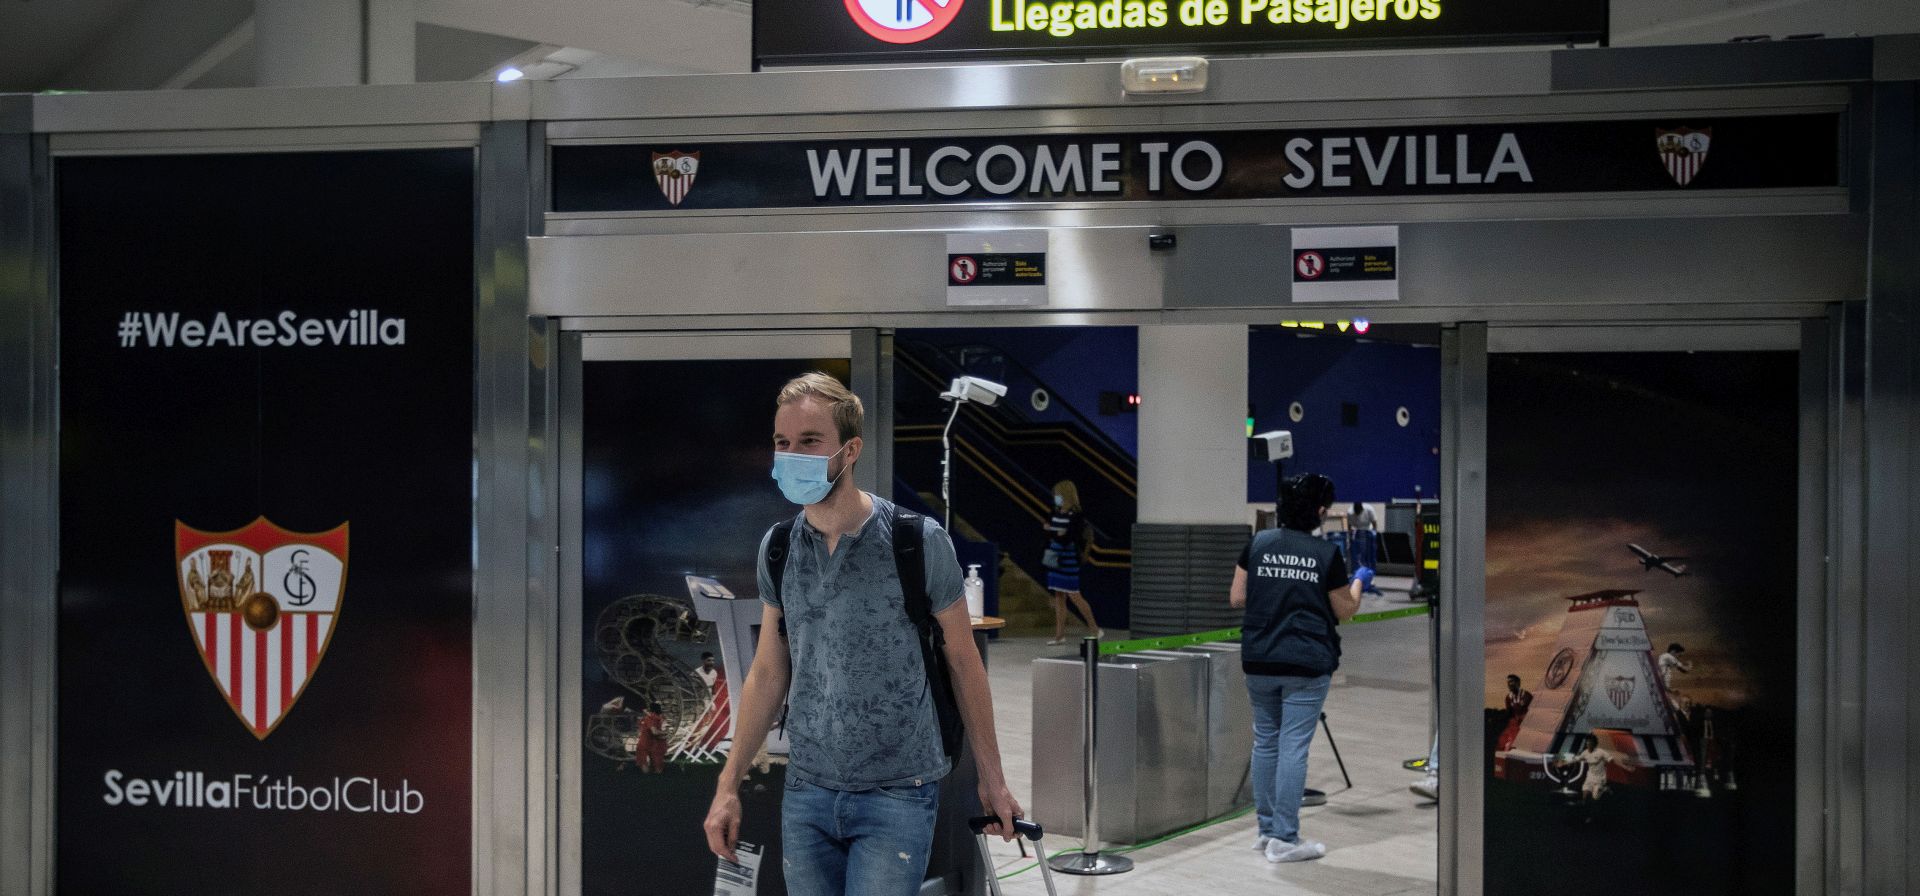 epa08500131 A traveler from the Netherlands wears a face mask as he arrives at the airport in Seville, aboard the first tourist flight after lifting the State of Emergency and lockdown to stop the spread of the coronavirus, in Seville, Andalusia, Spain, 21 June 2020. Spanish airports on the same day received travelers from the European Union and the Schengen space after being closed for about three months amid the coronavirus pandemic.  EPA/JOSE MANUEL VIDAL